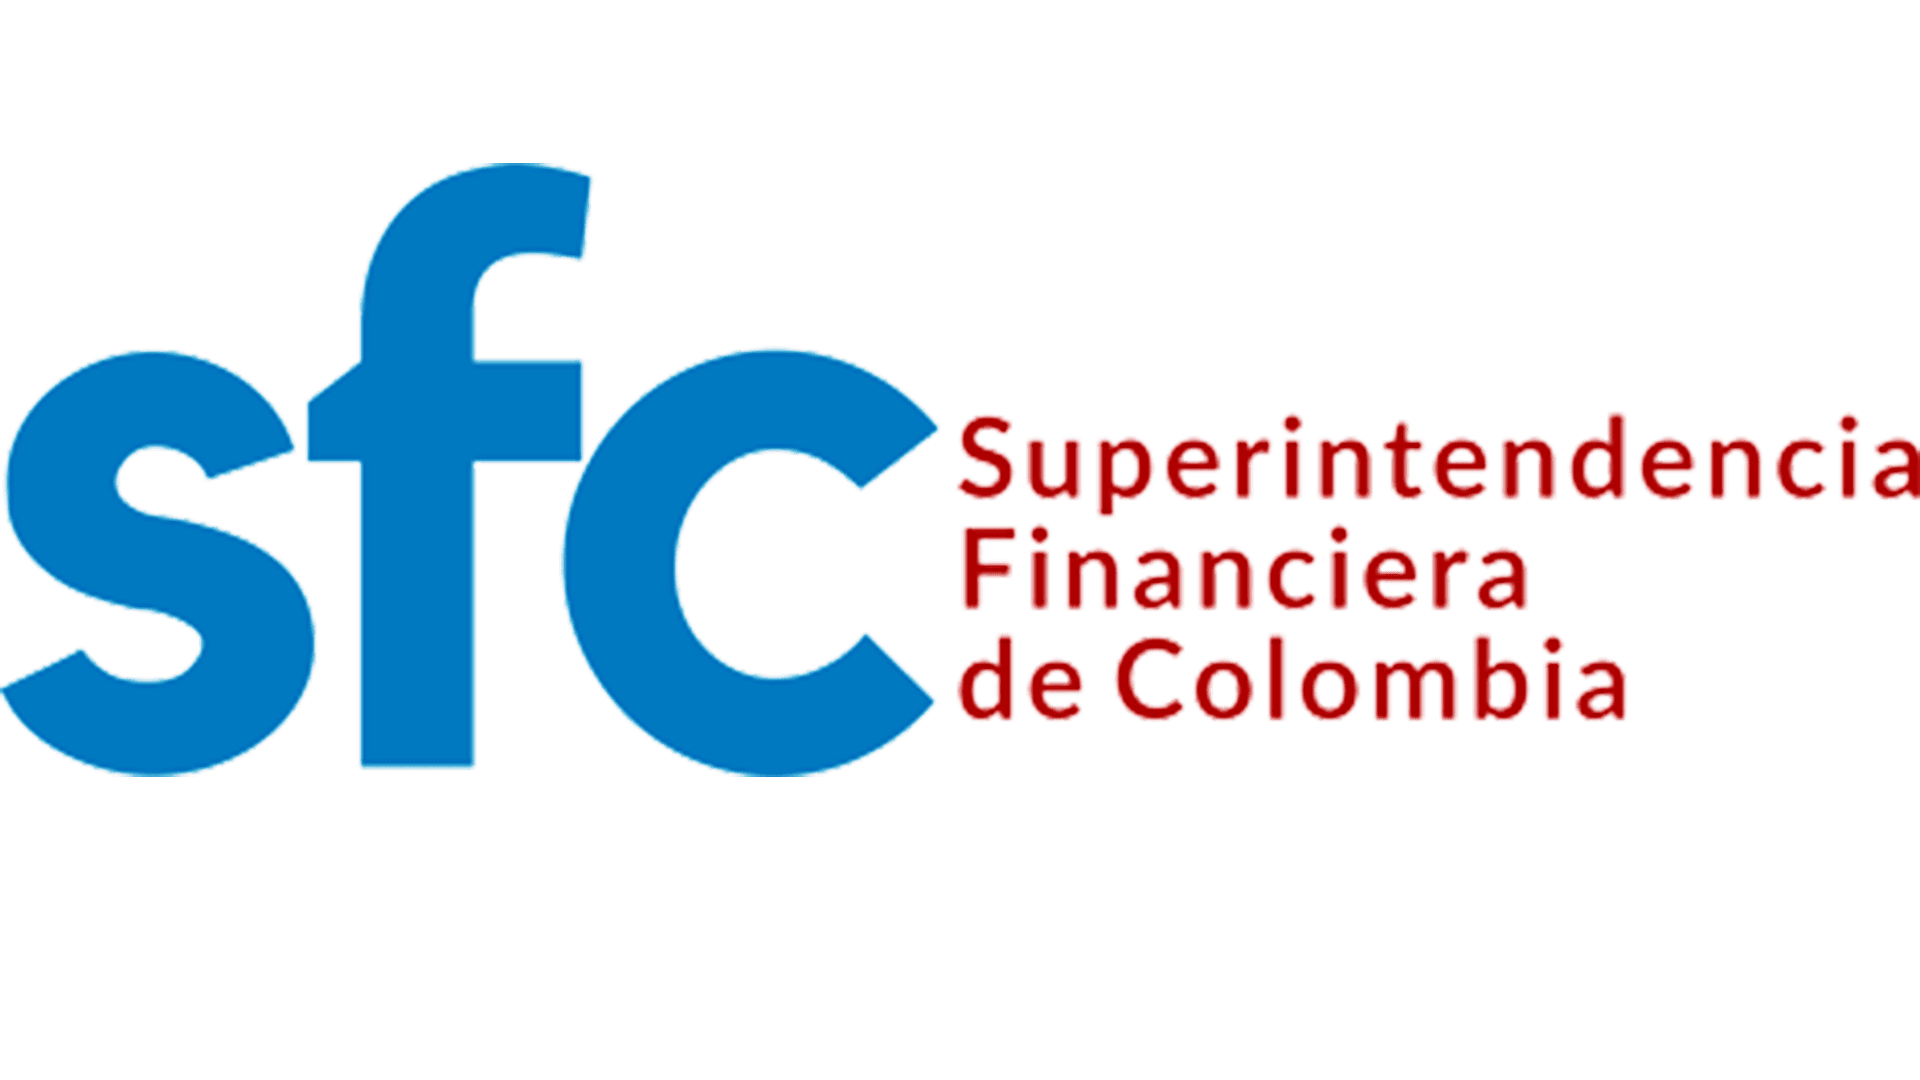 Financial Superintendency of Colombia's logo